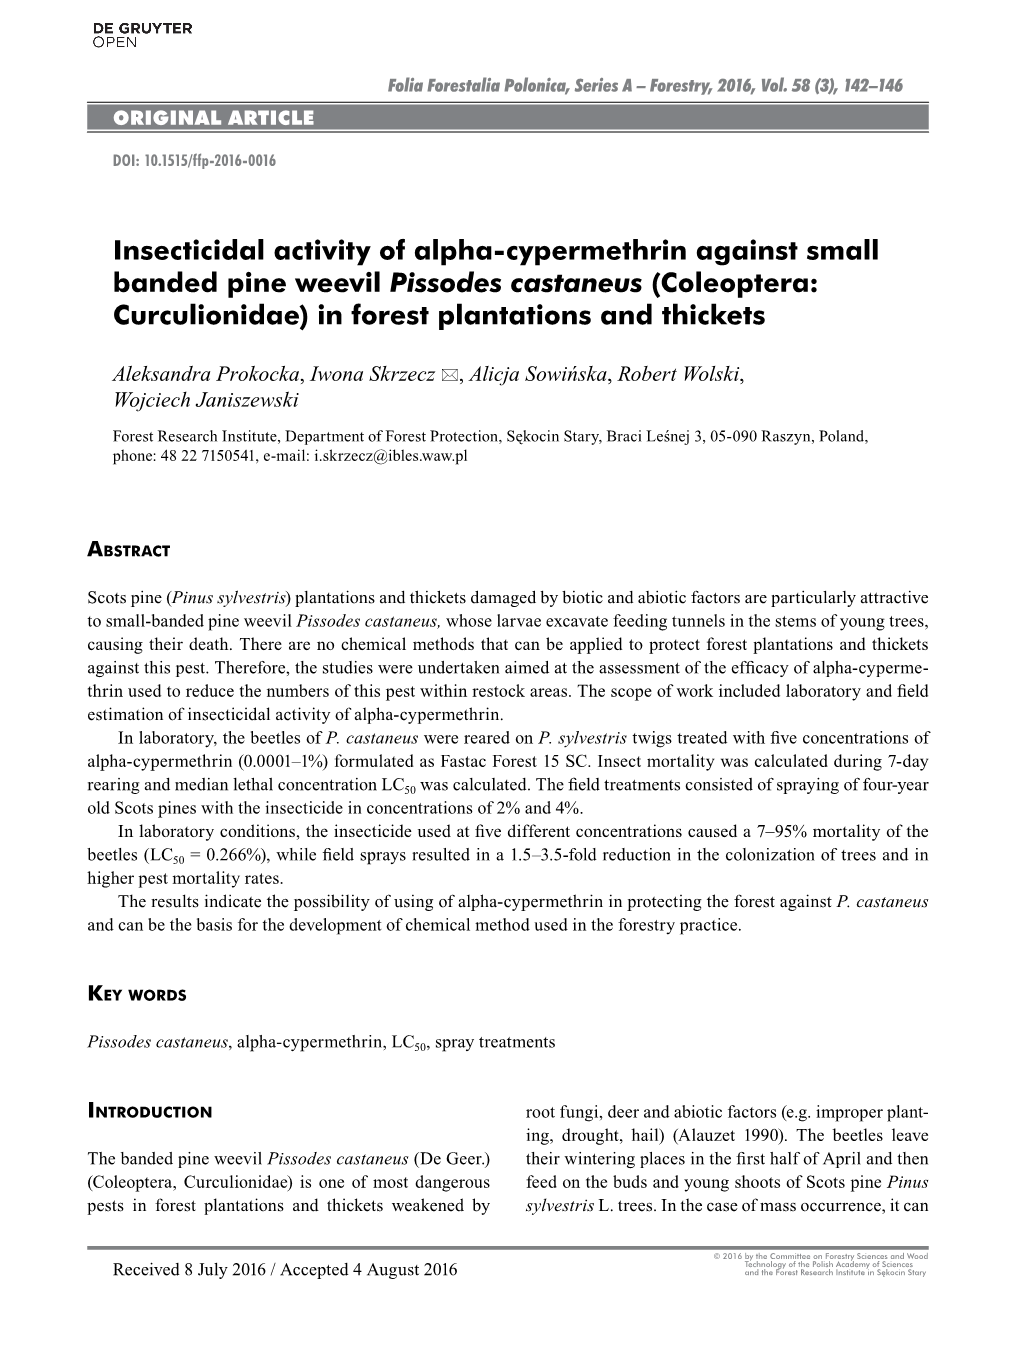 Insecticidal Activity of Alpha-Cypermethrin Against Small Banded Pine Weevil Pissodes Castaneus (Coleoptera: Curculionidae) in Forest Plantations and Thickets